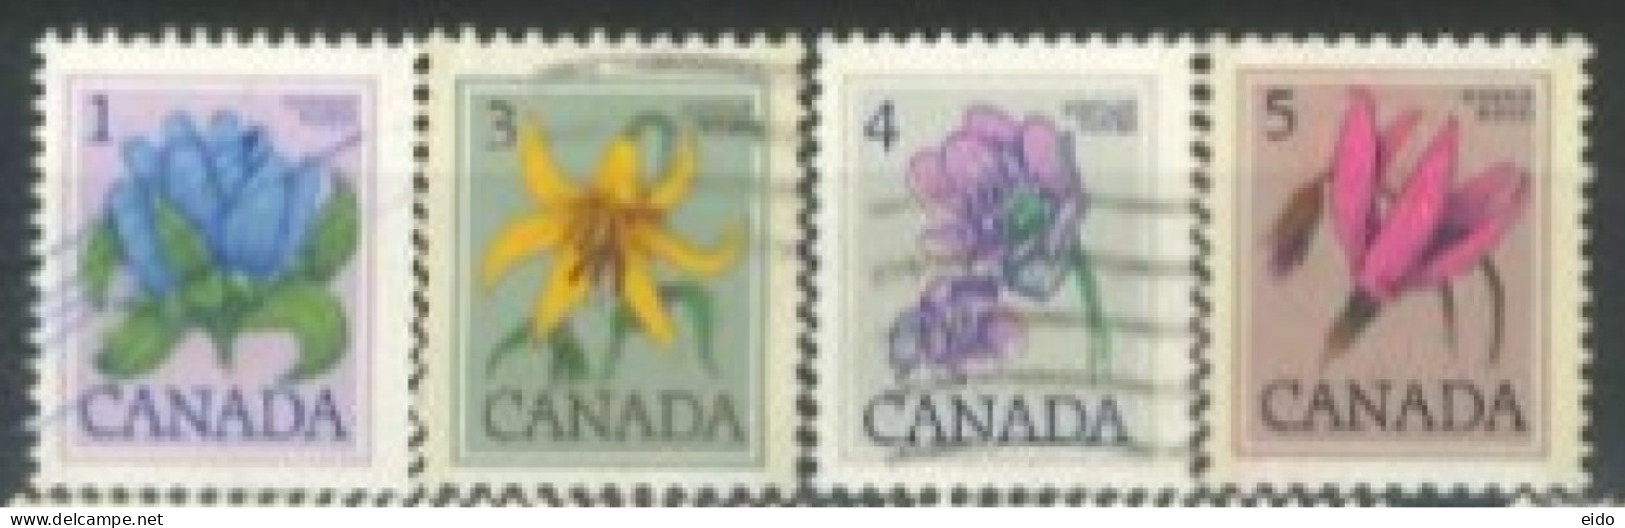 CANADA - 1977, FLOWERS STAMPS SET OF 4, USED. - Usados